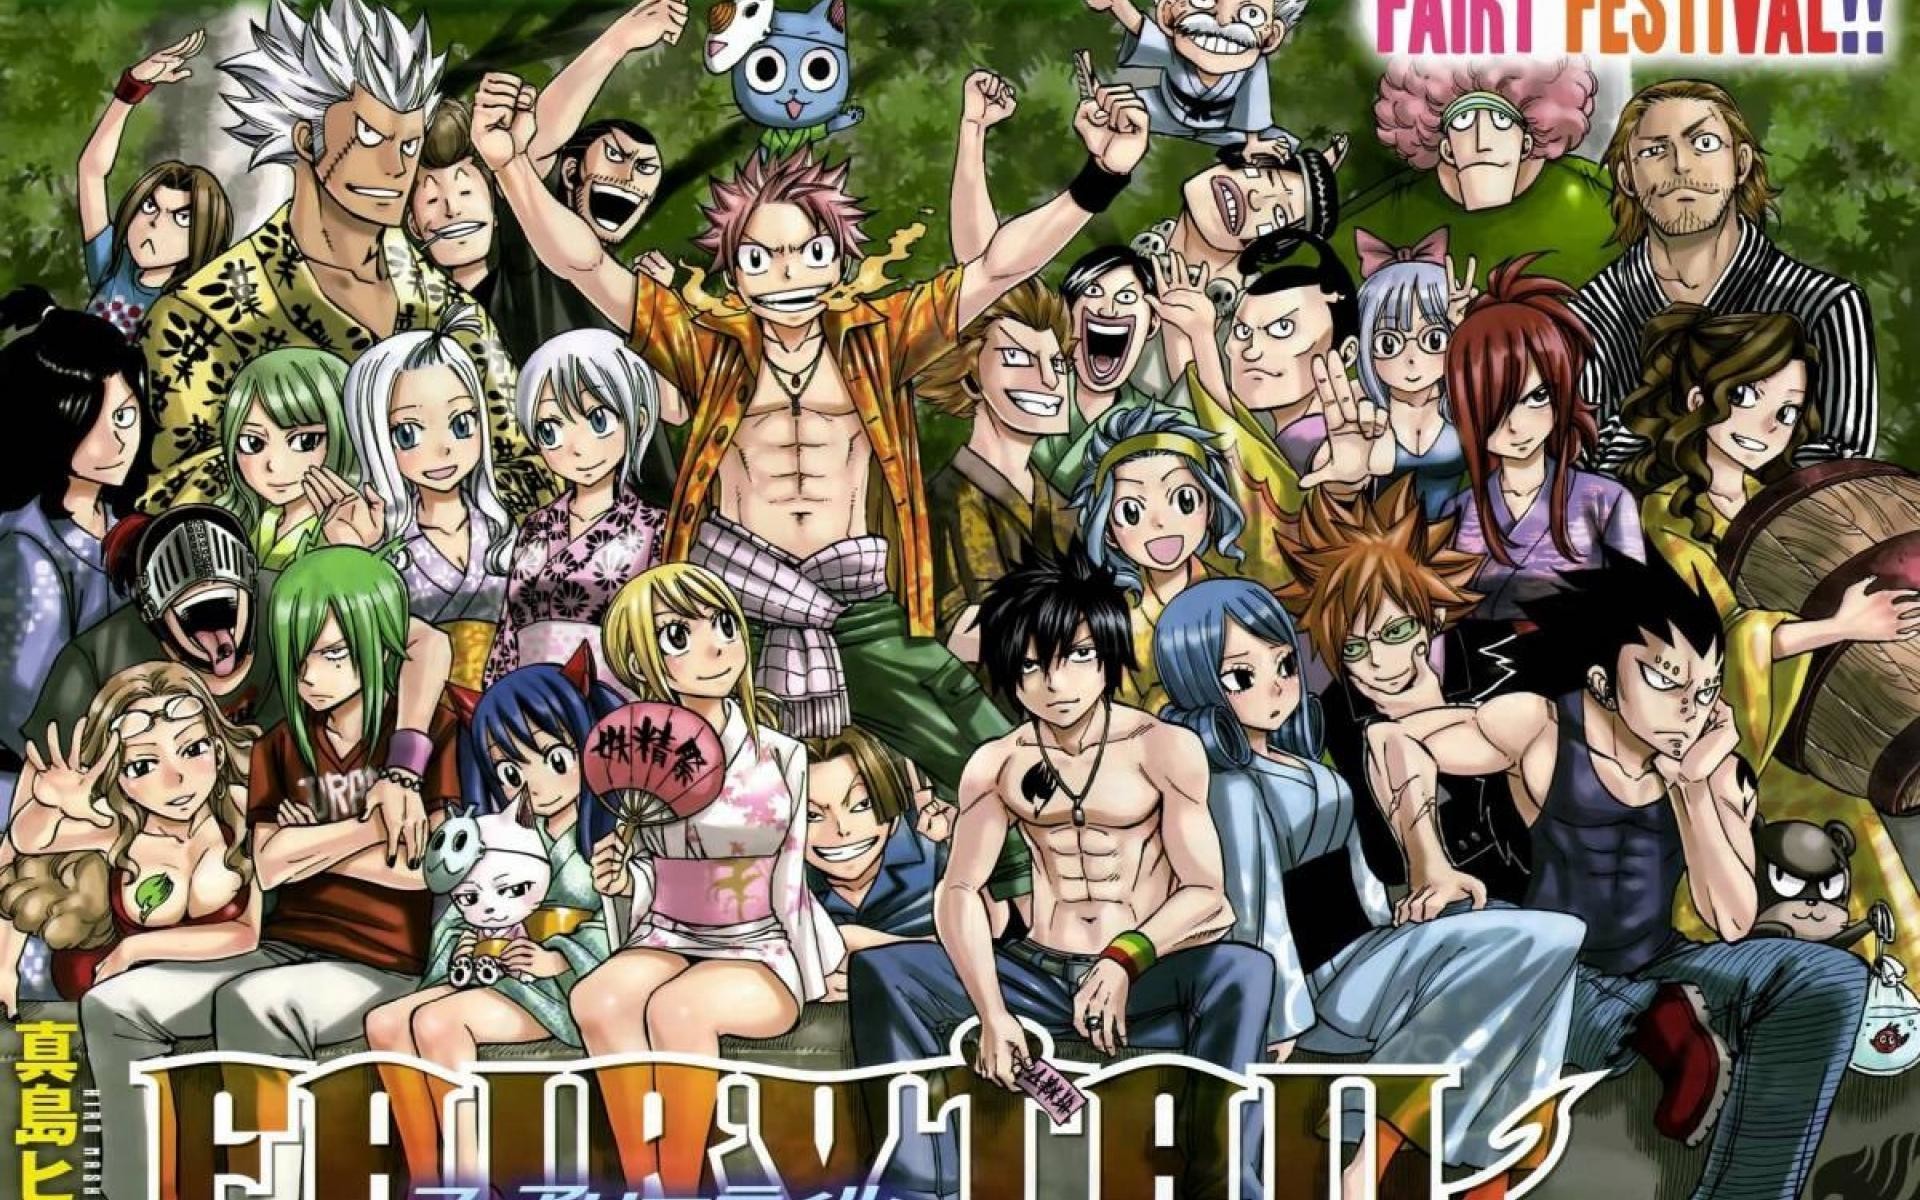 1920x1200 1592015 Fairy Tail wallpaper HD free wallpapers backgrounds images .